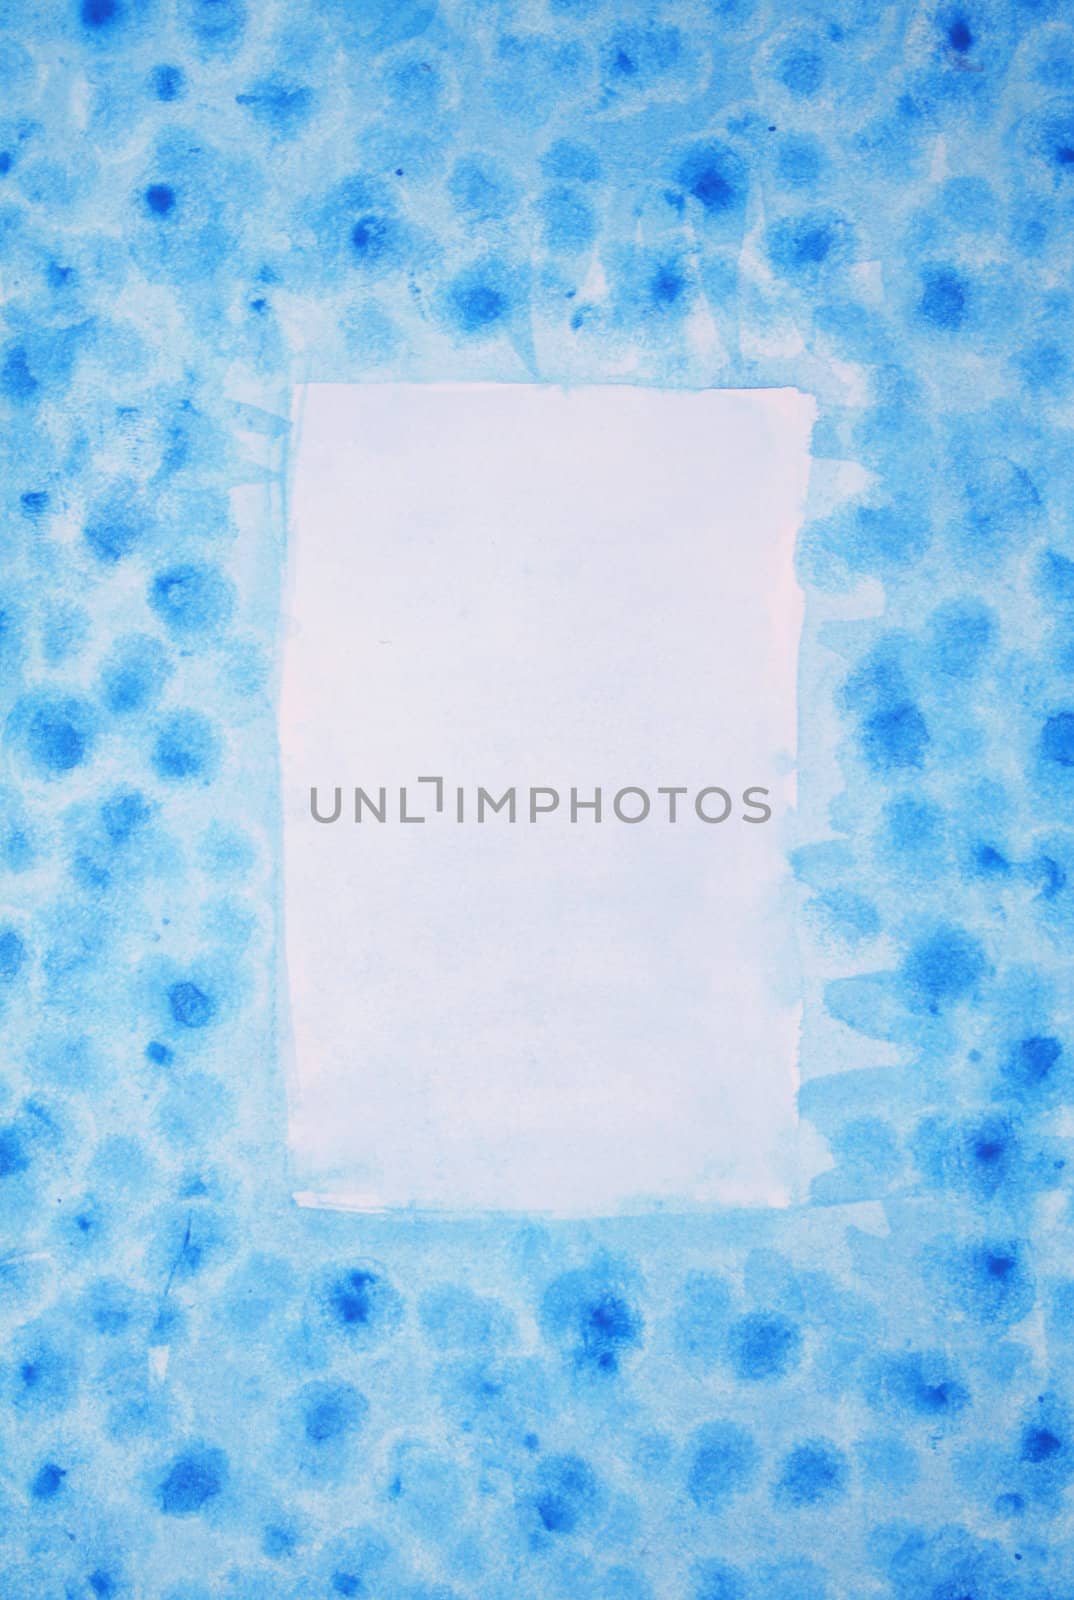 Abstract watercolor frame background with blue layers on paper texture